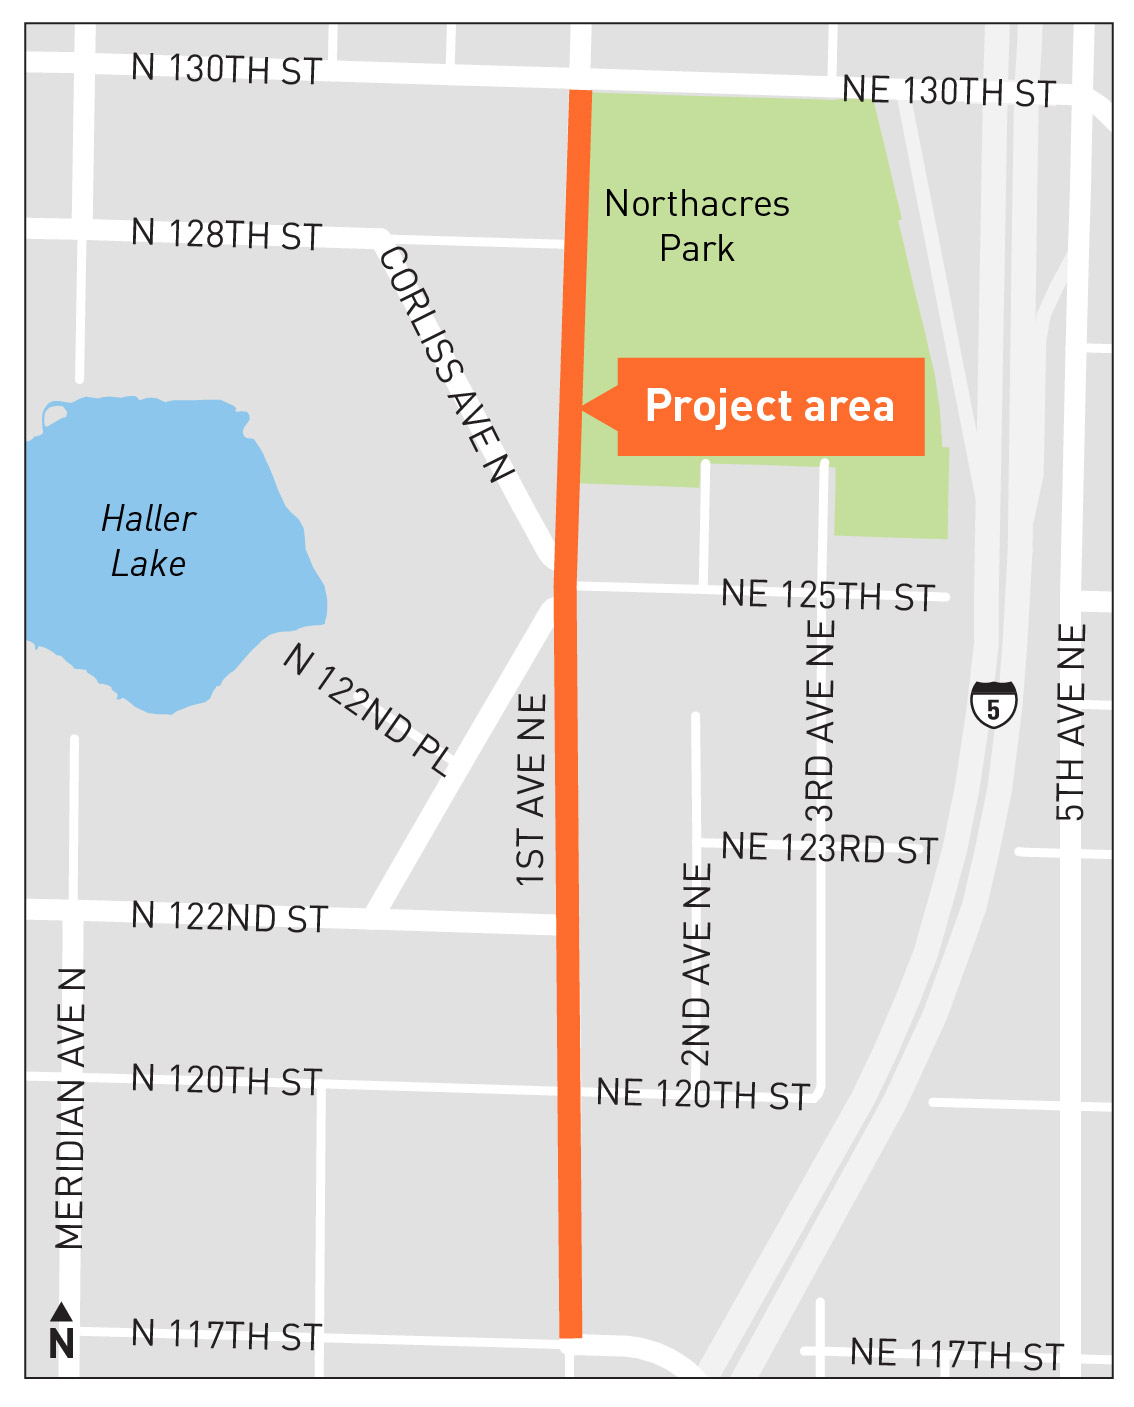 Map showing the project limits on 1st Ave NE between NE 117th St and NE 130th St